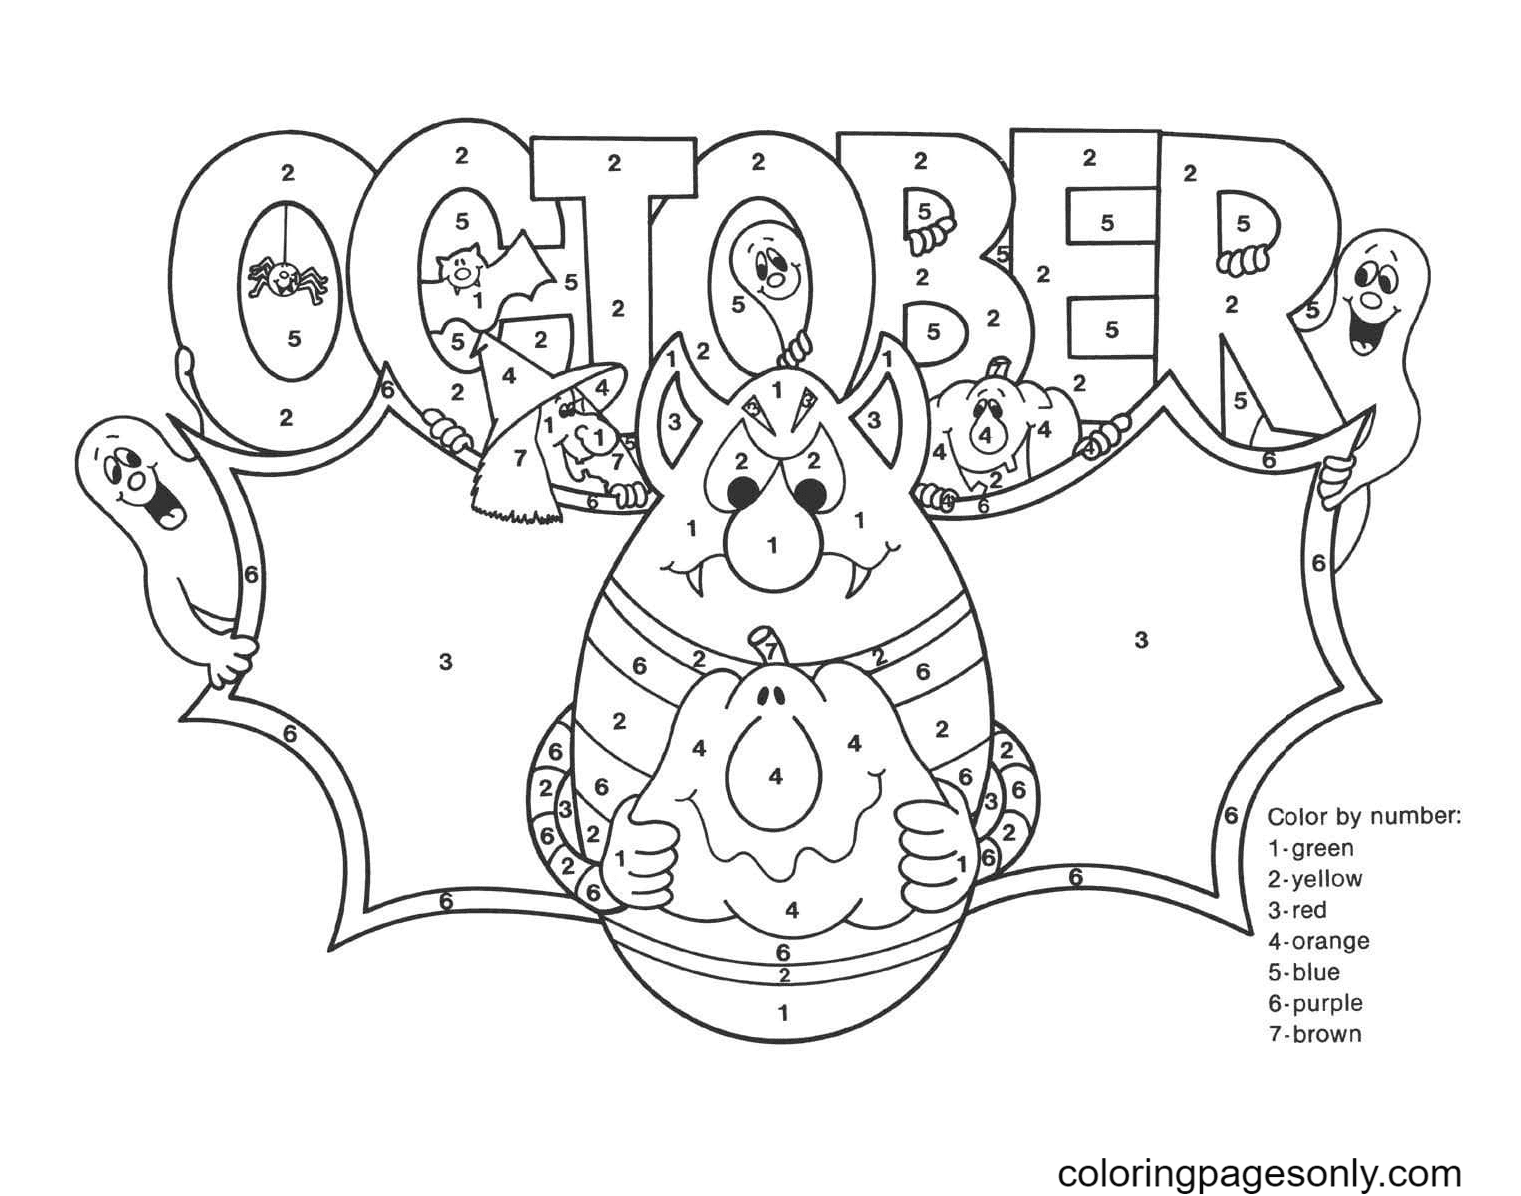 Color October by numbers Coloring Pages